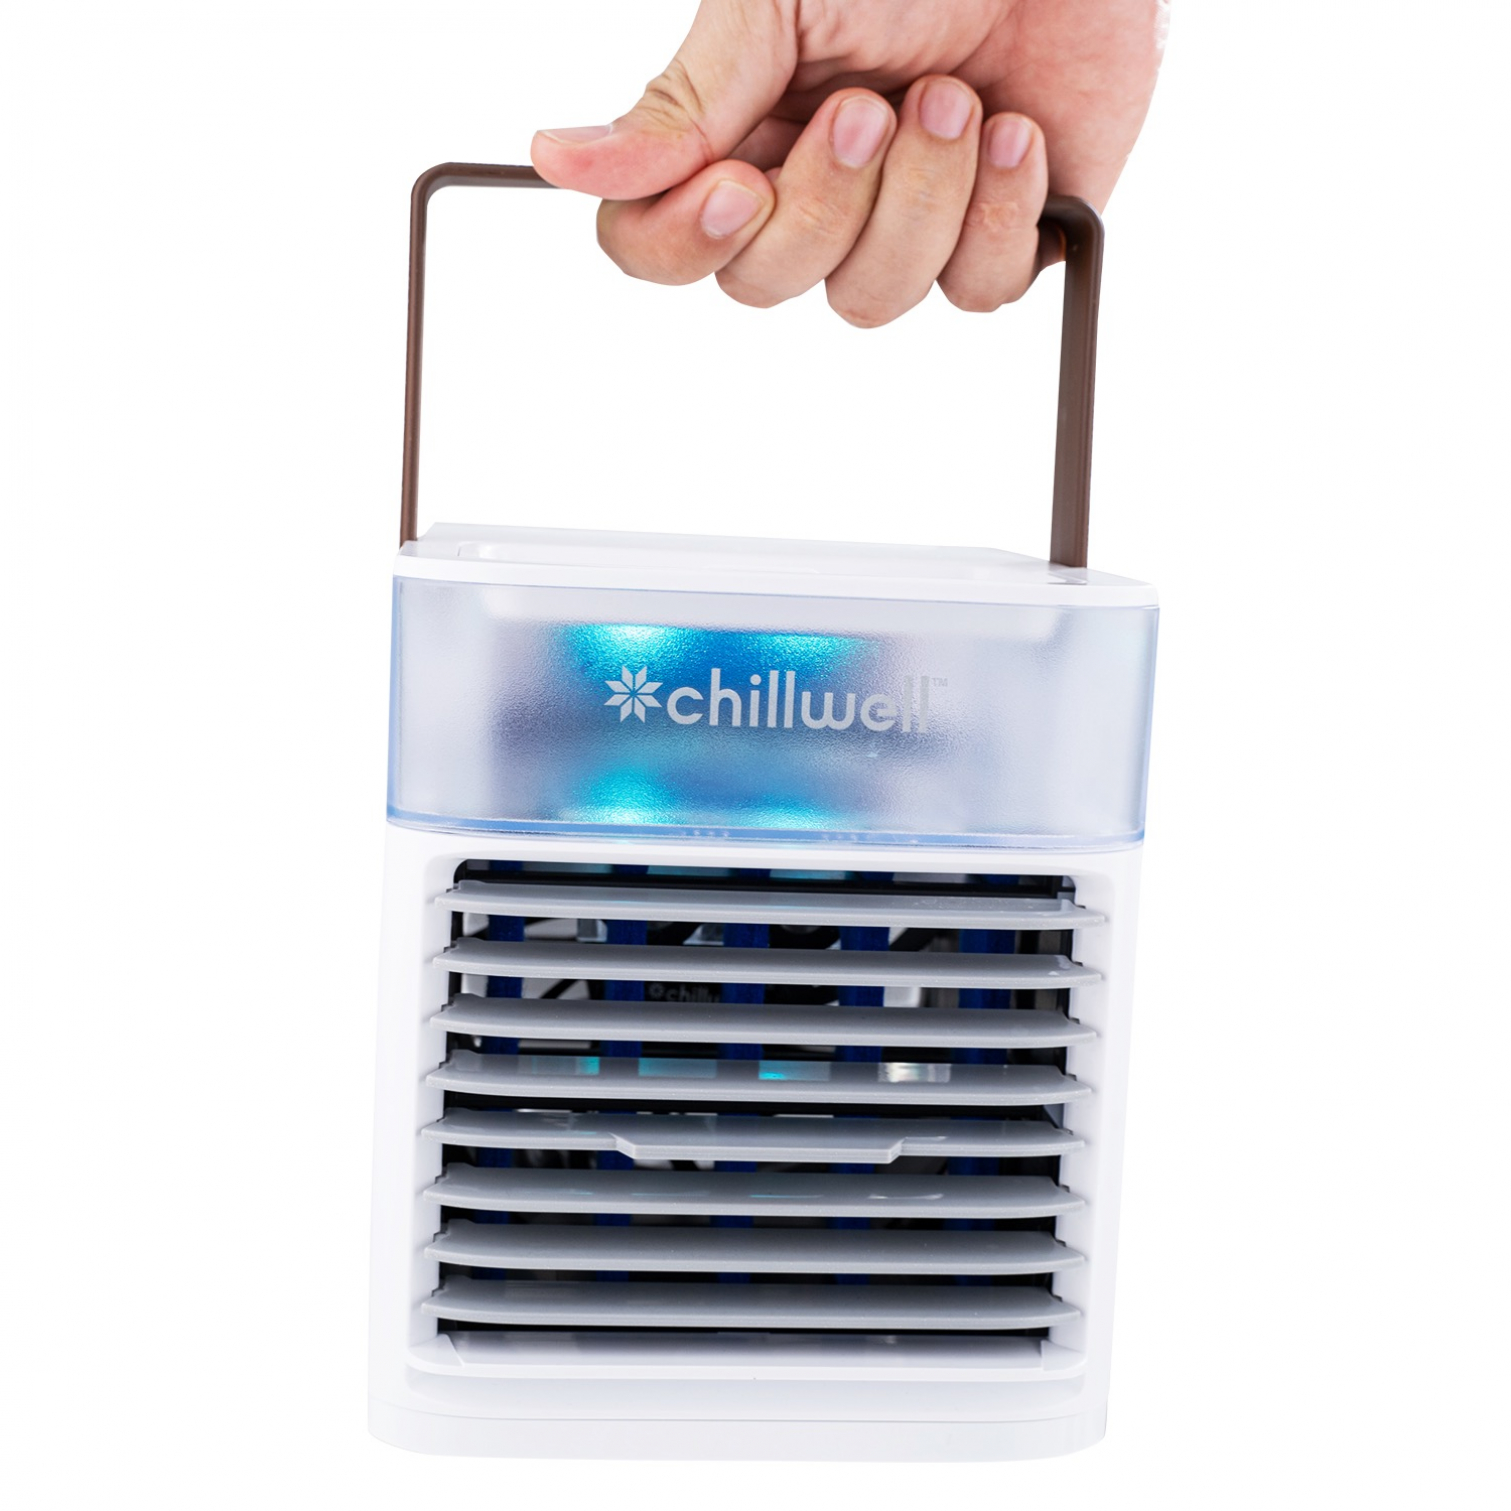 Is Chillwell Ac An Air Conditioner